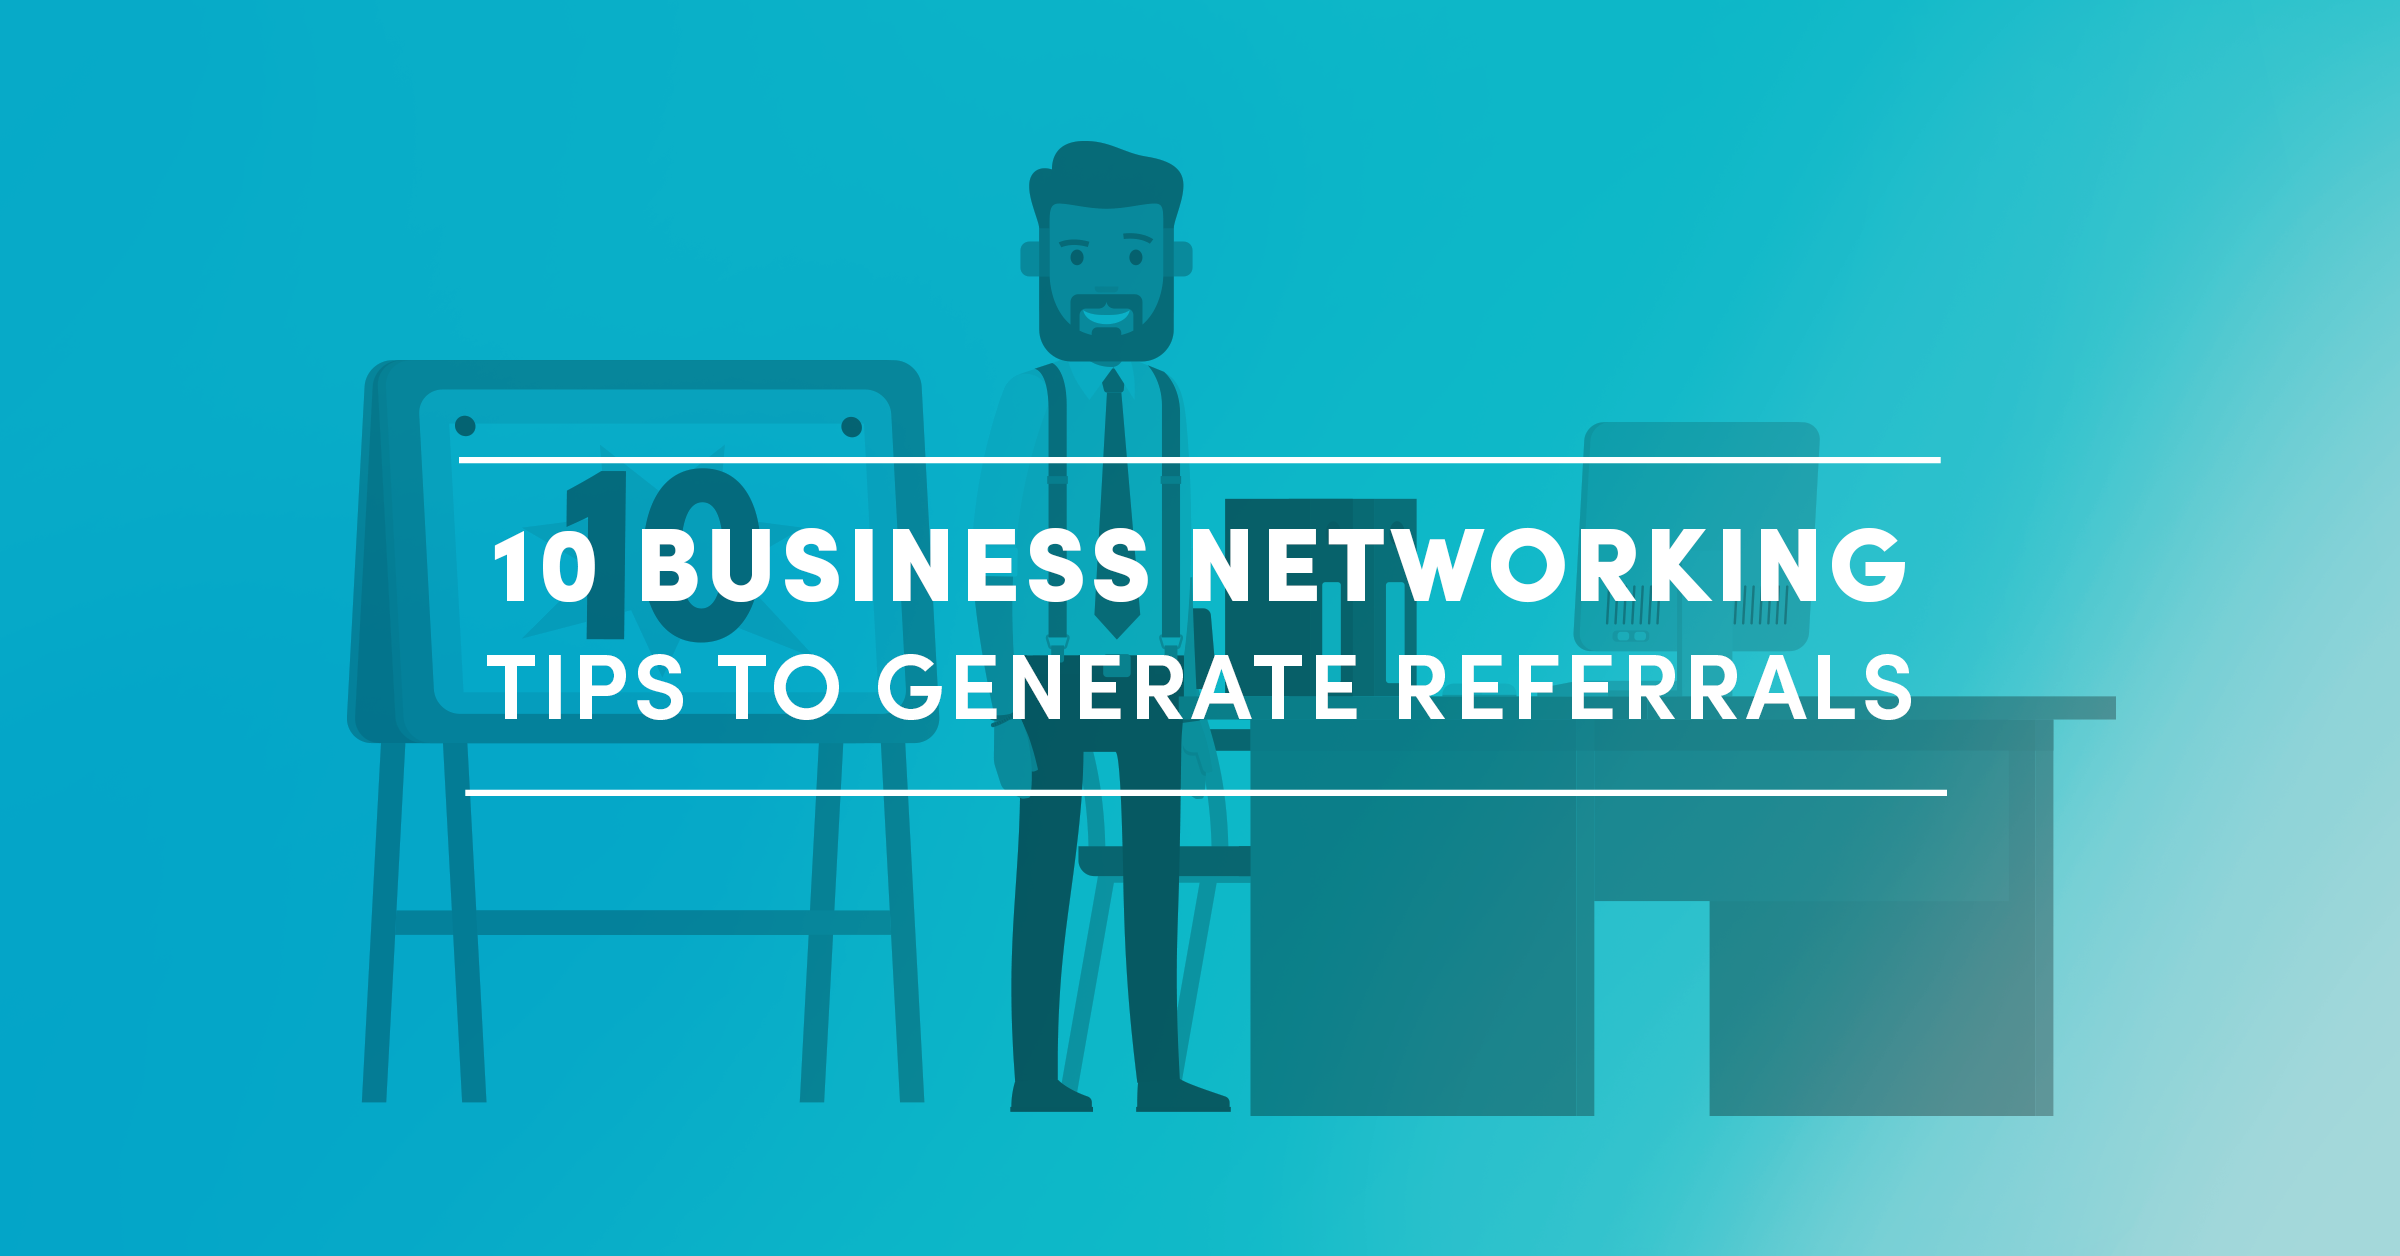 10 Business Networking Tips to Generate Referrals